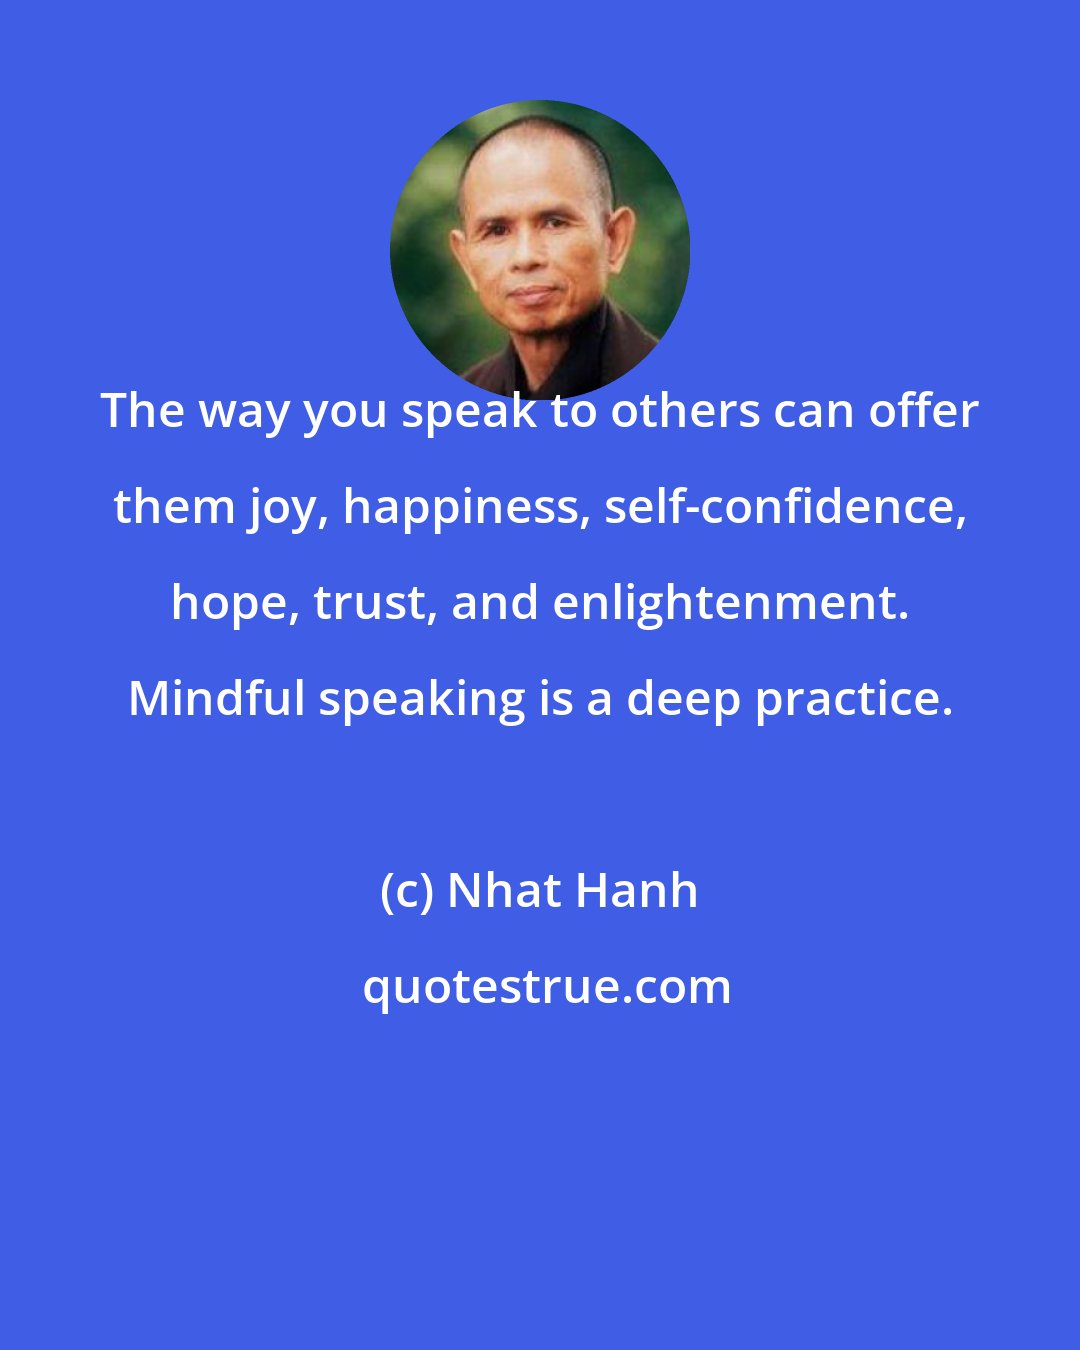 Nhat Hanh: The way you speak to others can offer them joy, happiness, self-confidence, hope, trust, and enlightenment. Mindful speaking is a deep practice.